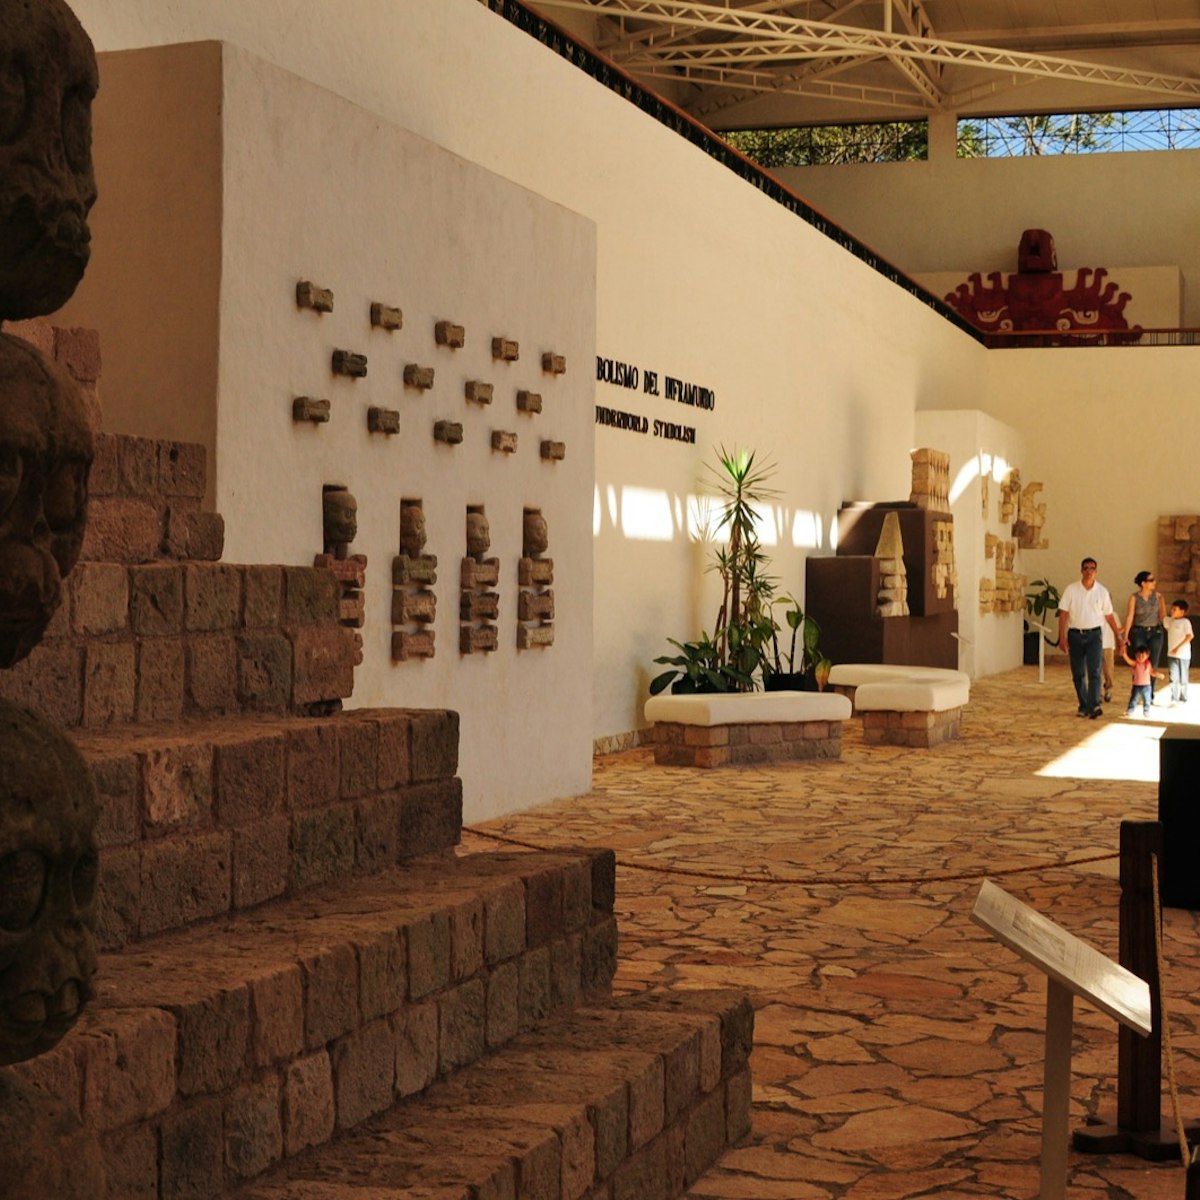 Interior of Copan Museum in Honduras; Shutterstock ID 80582617; Your name (First / Last): William Broich; GL account no.: 65050; Netsuite department name: Online Editorial ; Full Product or Project name including edition: Honduras